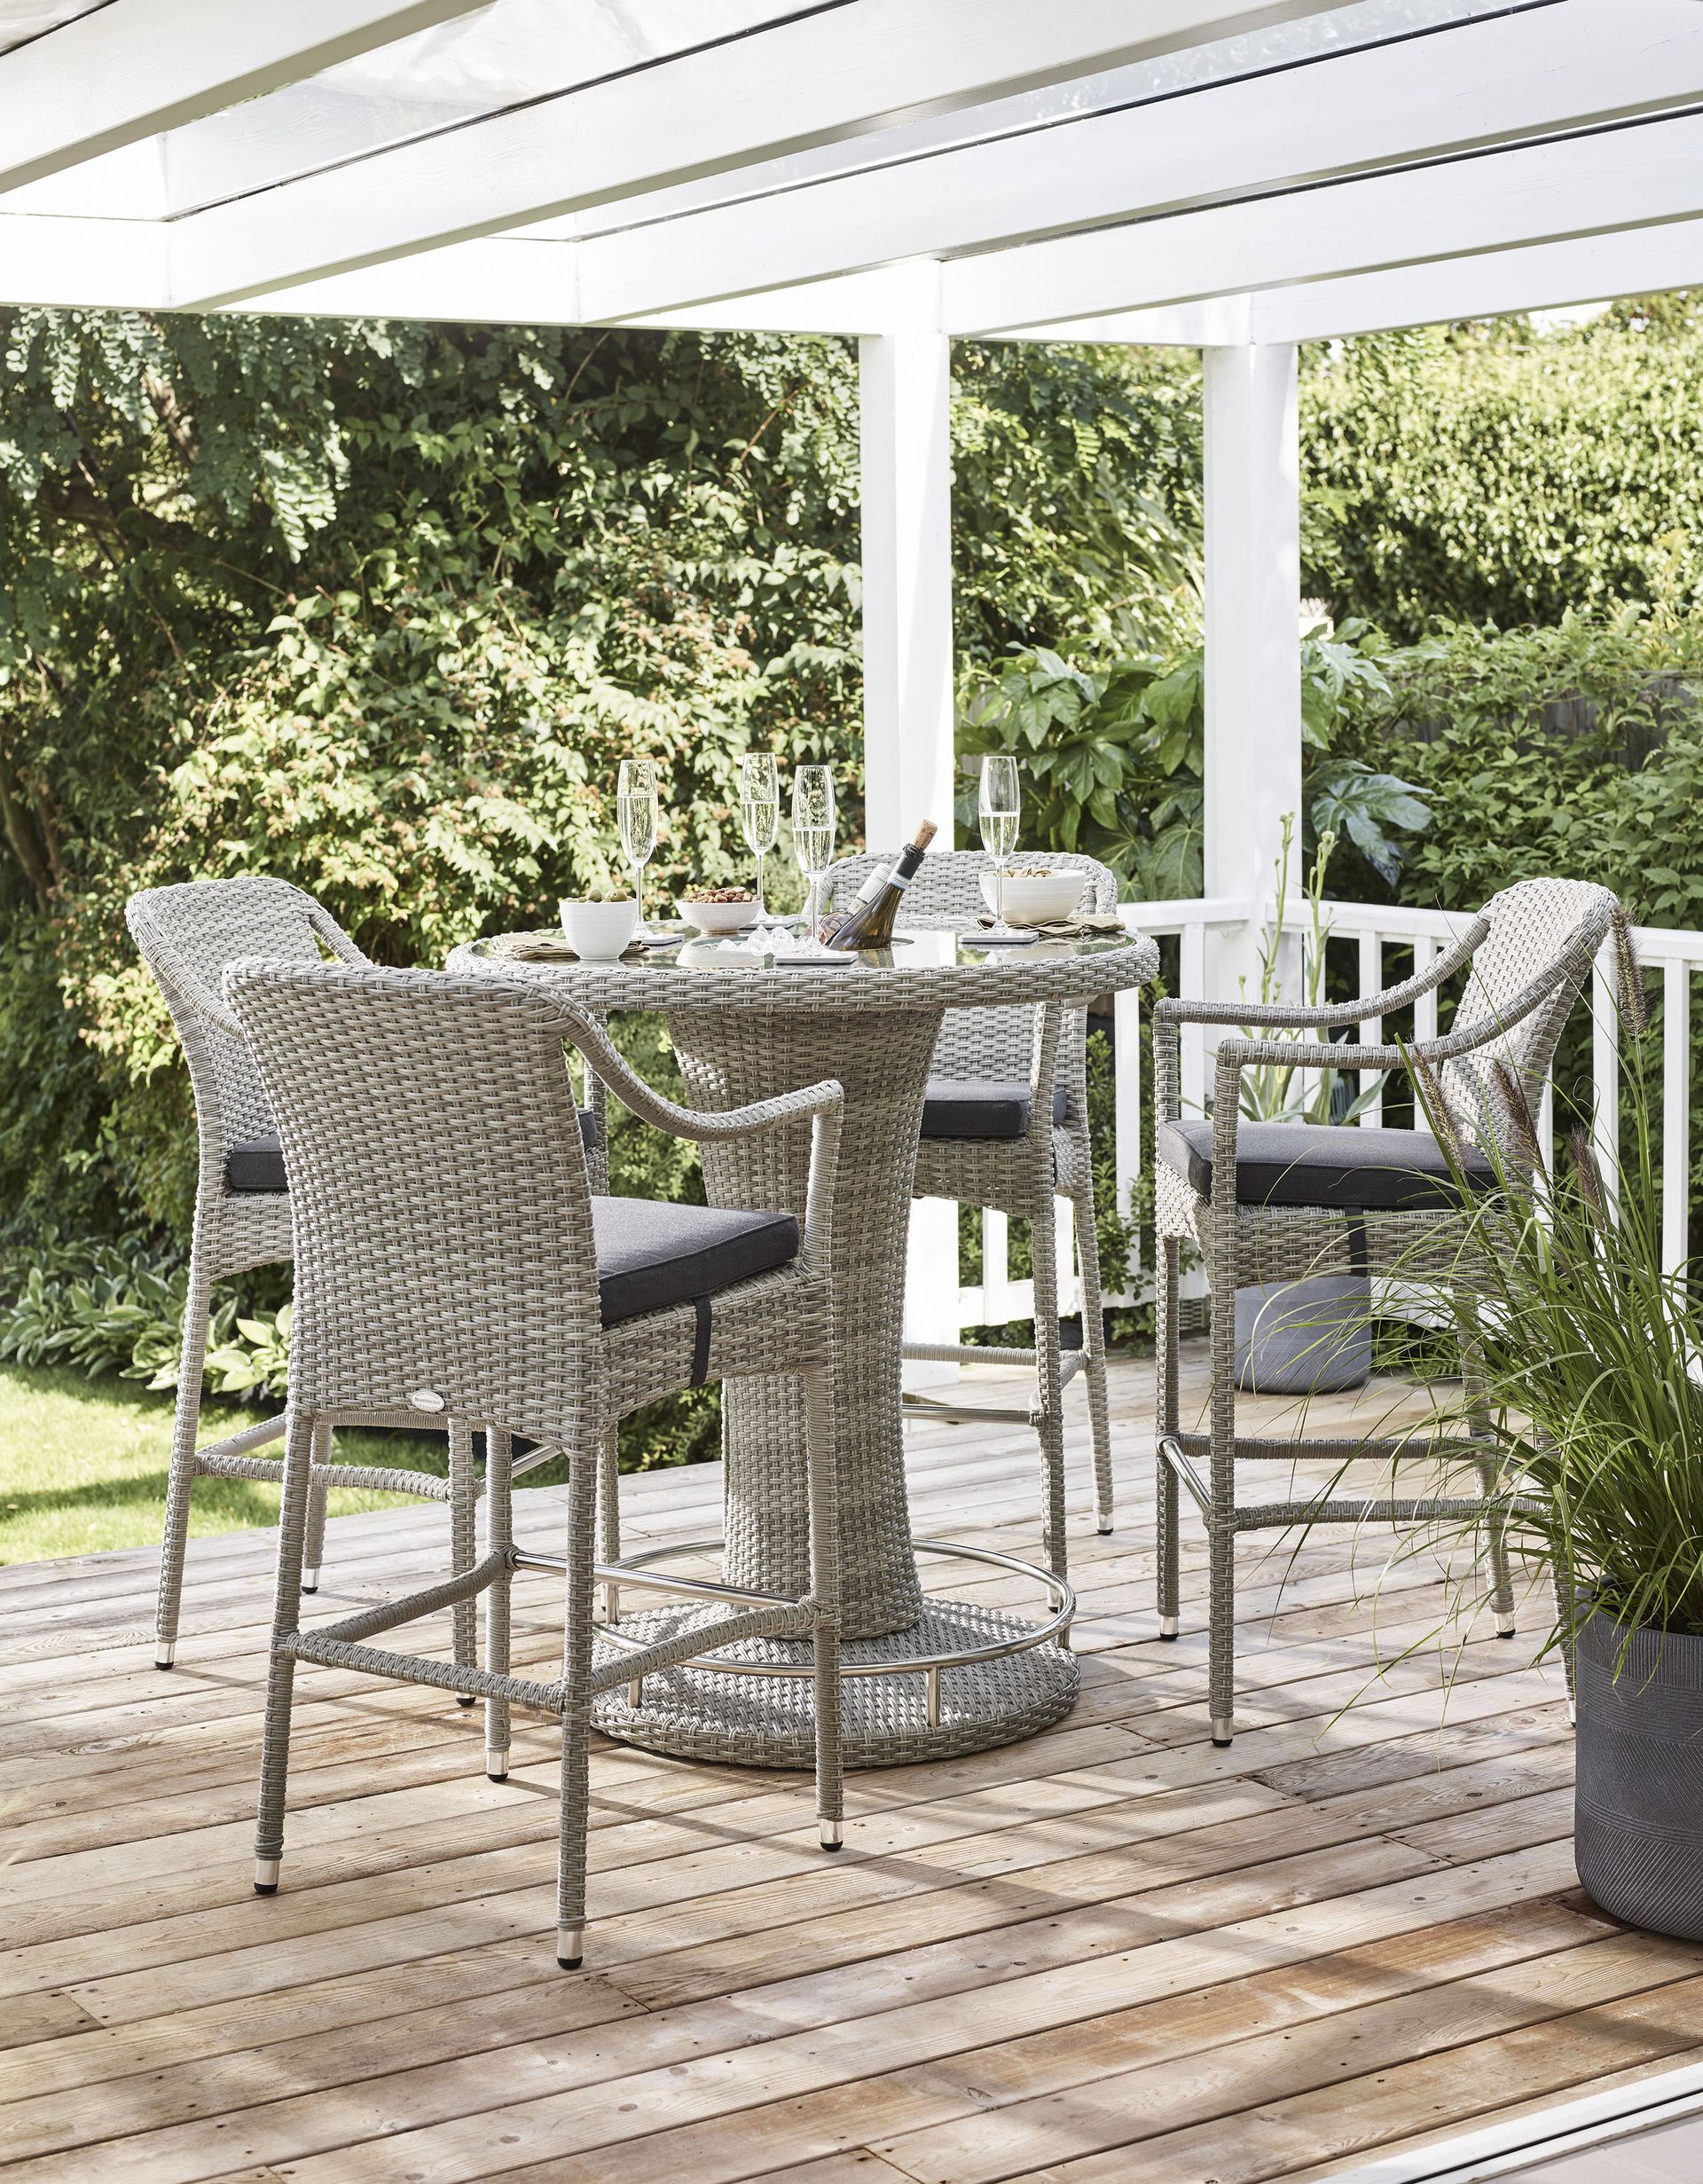 <p>                     Singapore Sling anyone? Bring a touch of Raffles-style glamour to your patio ideas with a stylish plantation-style wicker bar set. That way, you can truly relax over chilled pre-dinner drinks as it will feel like being on holiday.                   </p>                                      <p>                     This set above is made of maintenance-free wicker and comes with four bar stools and a table. Plus, it has a removable ice bucket in the center for keeping your bottle of bubbly within arm's reach.                   </p>